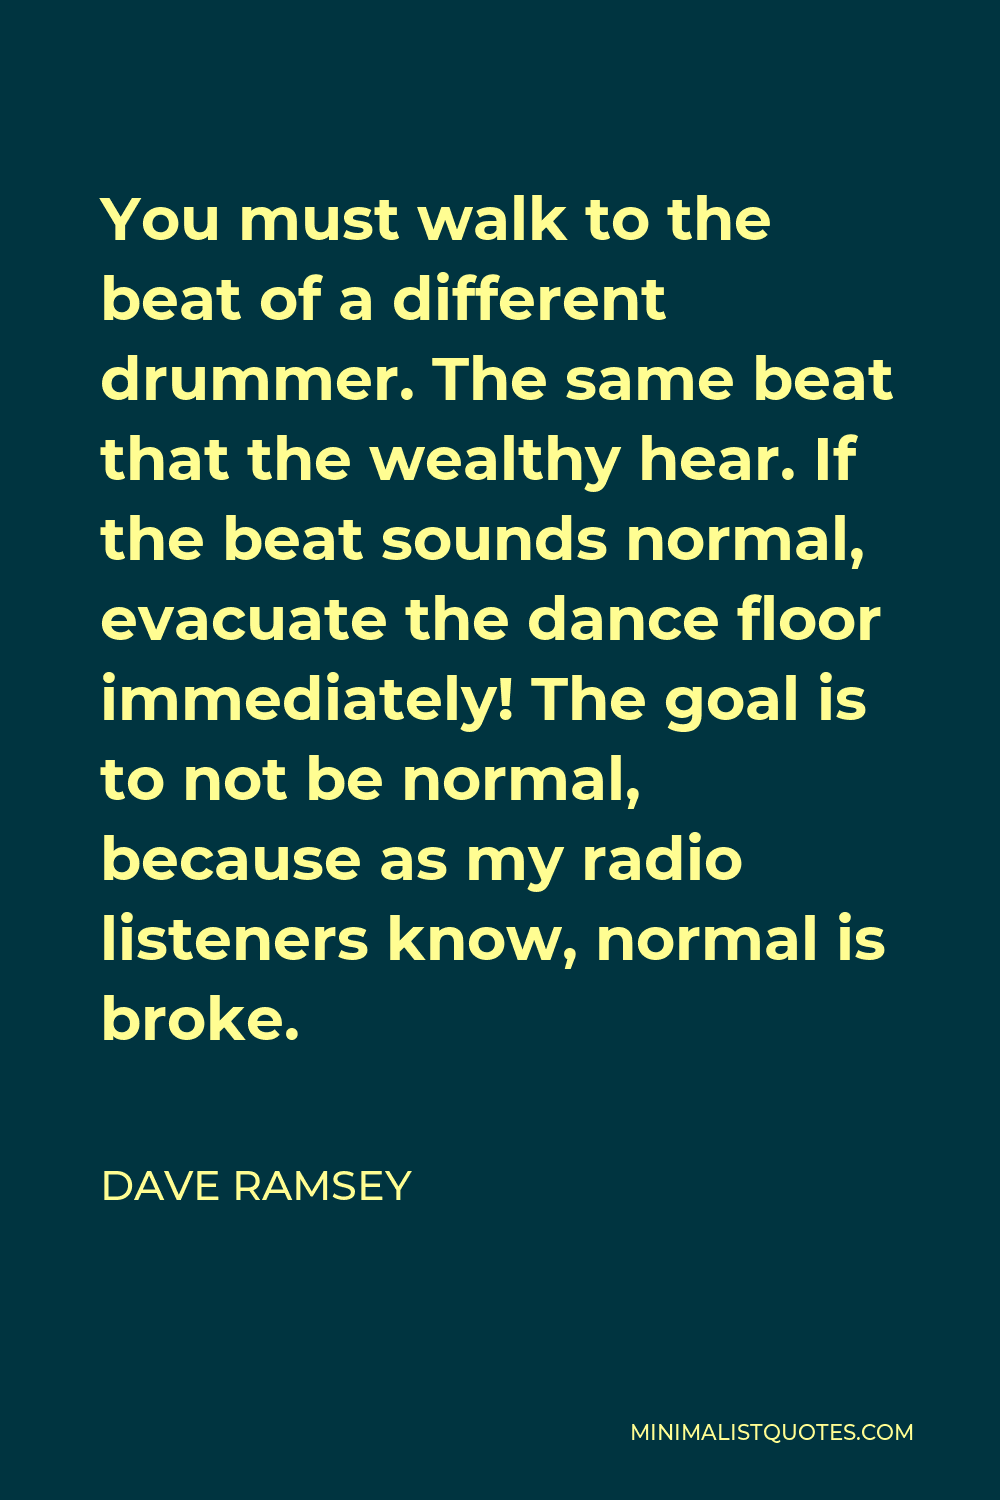 Dave Ramsey Quote - You must walk to the beat of a different drummer. The same beat that the wealthy hear. If the beat sounds normal, evacuate the dance floor immediately! The goal is to not be normal, because as my radio listeners know, normal is broke.